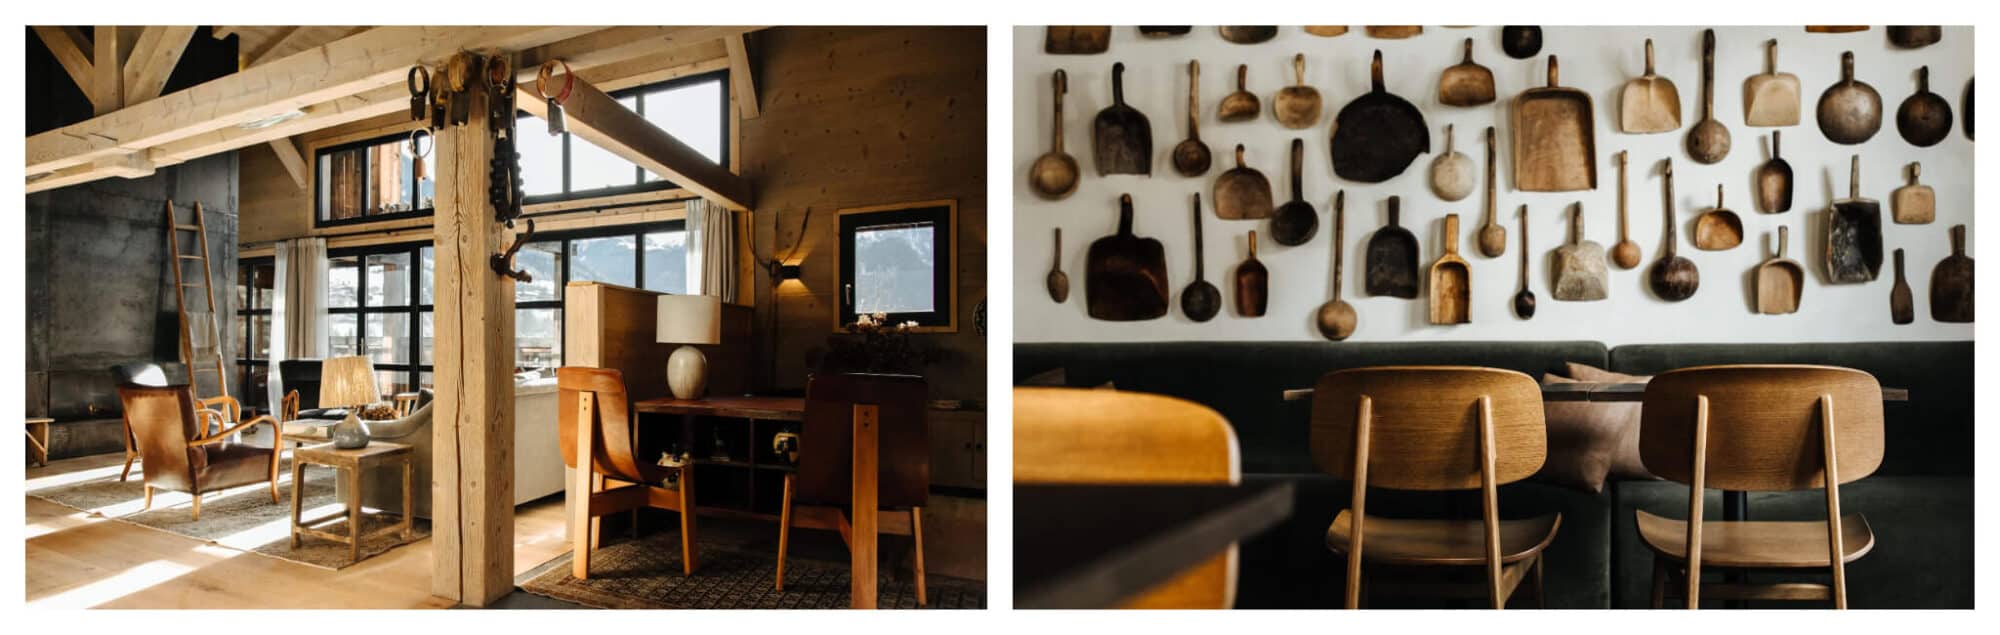 Left: The interior of L'Alpaga ski resort in the French Alps, with wooden pillars, flooring, and furniture and a black wall. Right: L'Alpaga's restaurant interior with wooden chairs and a collection of wooden kitchen utensils hanging on the wall.